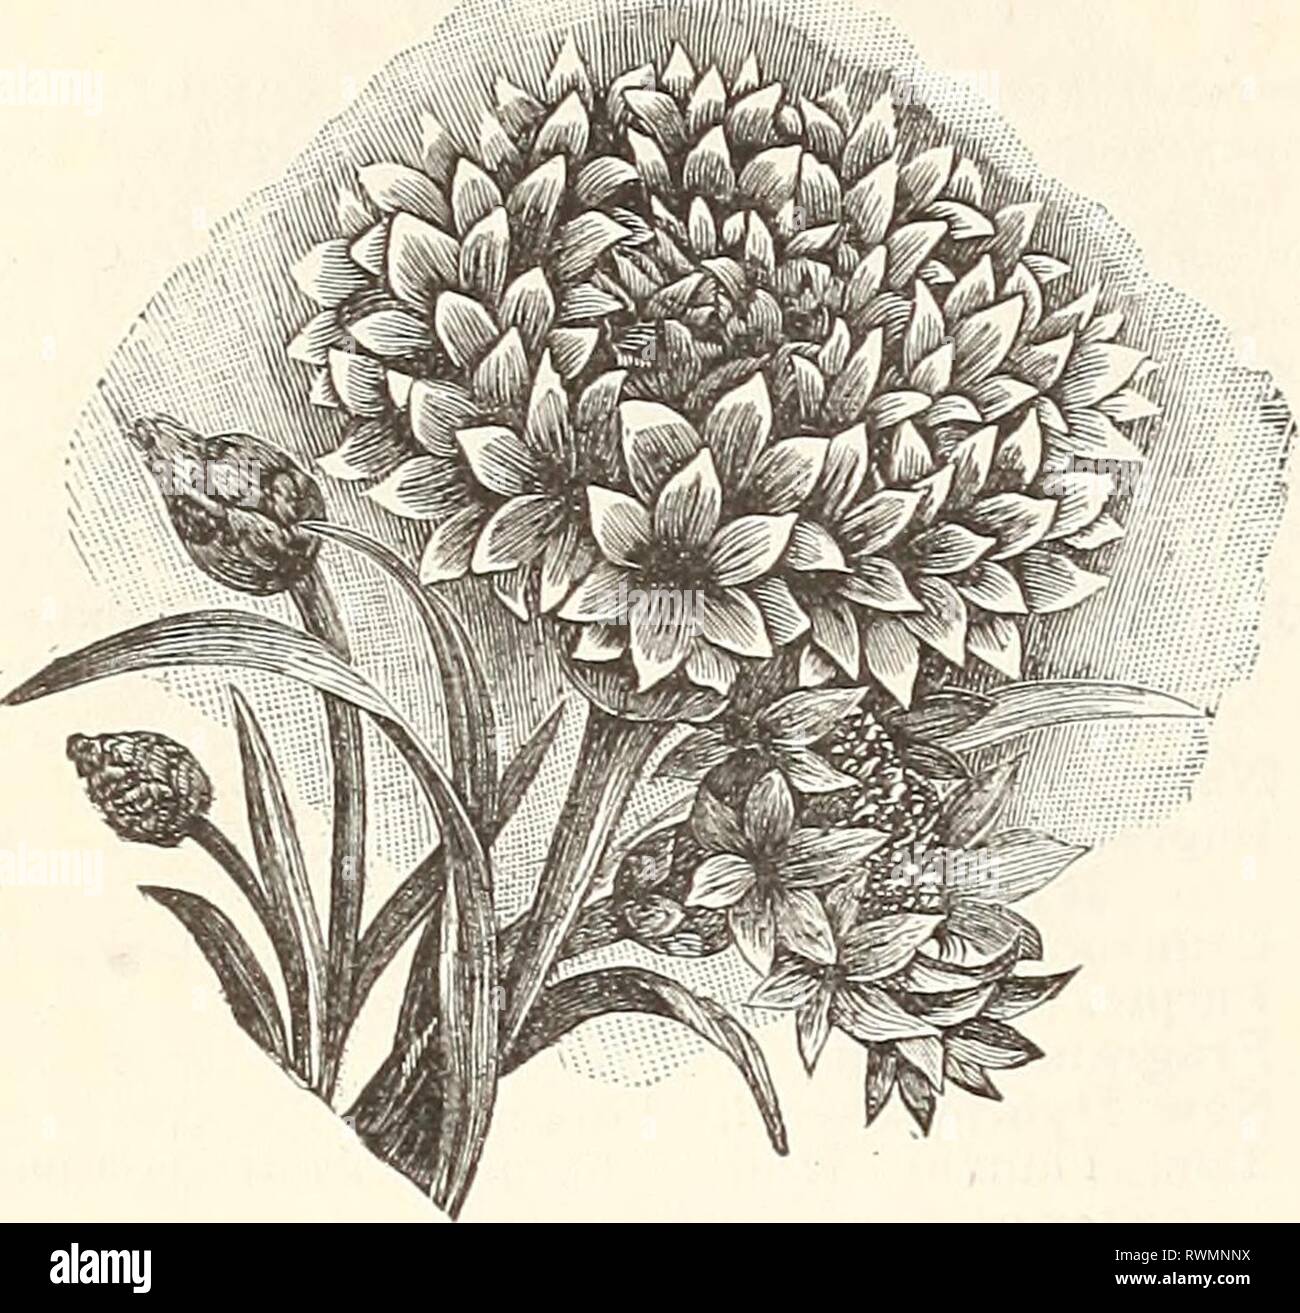 Elliott's 1894 catalogue (1894) Elliott's 1894 catalogue elliotts1894cata1894wmel Year: 1894  WM. ELLIOTT & SONS' GENERAL CATALOGUE FOR 1894.    CHRYSANTHEMUMâG)Â«//Â«z.nt every annual garden ; they are also good for ordi- nary bouquet cutting. All the annual Chrysanthe- â dJ*''.&gt;in ^B^Si^-.'M^SK^^)^l mums make beautiful pot plants if sown in cold   ^j^ -^^â'nijgÂ»mg|*g:aiiiairi ' T=^SsiÂ®l/'' frames, and pricked off singly into 6-inch pots. They '2Â«BM^8''^^^^fit') i' f^^Jl are perfectly hardy. Chrysanthemum, Segetum Grandiflorum. Tne golden ^'^B^ ''^']M Marguerite, large bright yellow fl Stock Photo